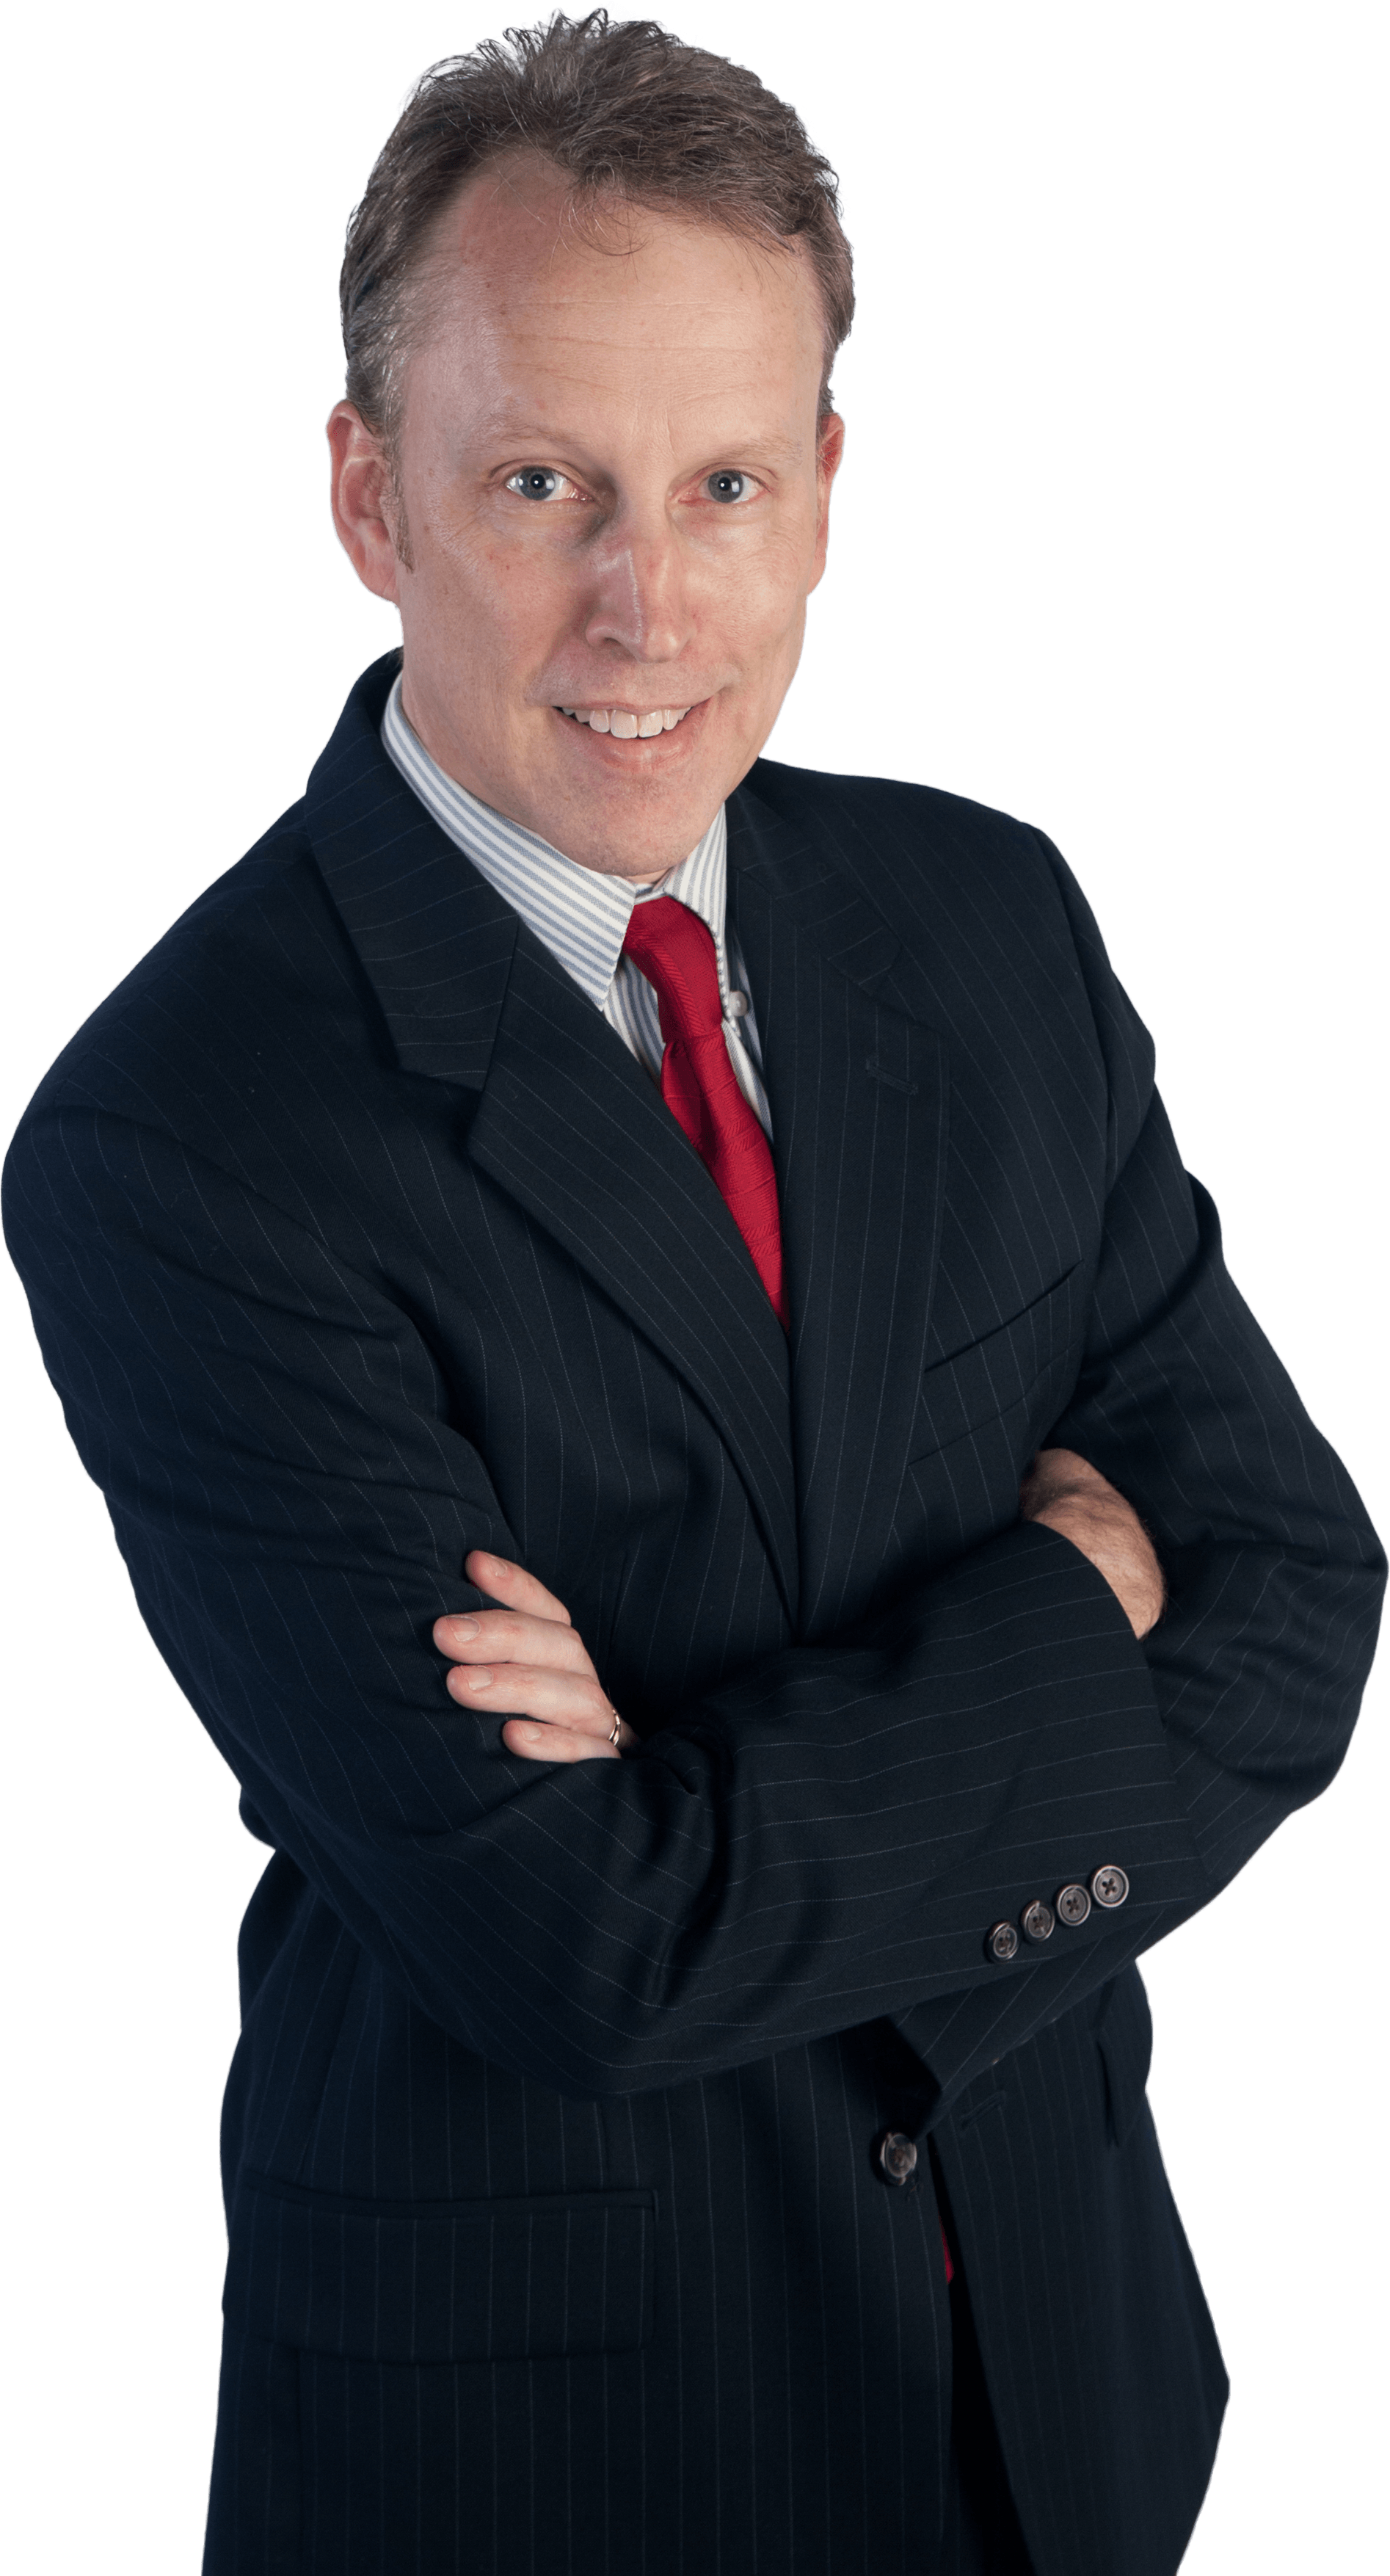 Standing Professional Photos Business Man PNG Image